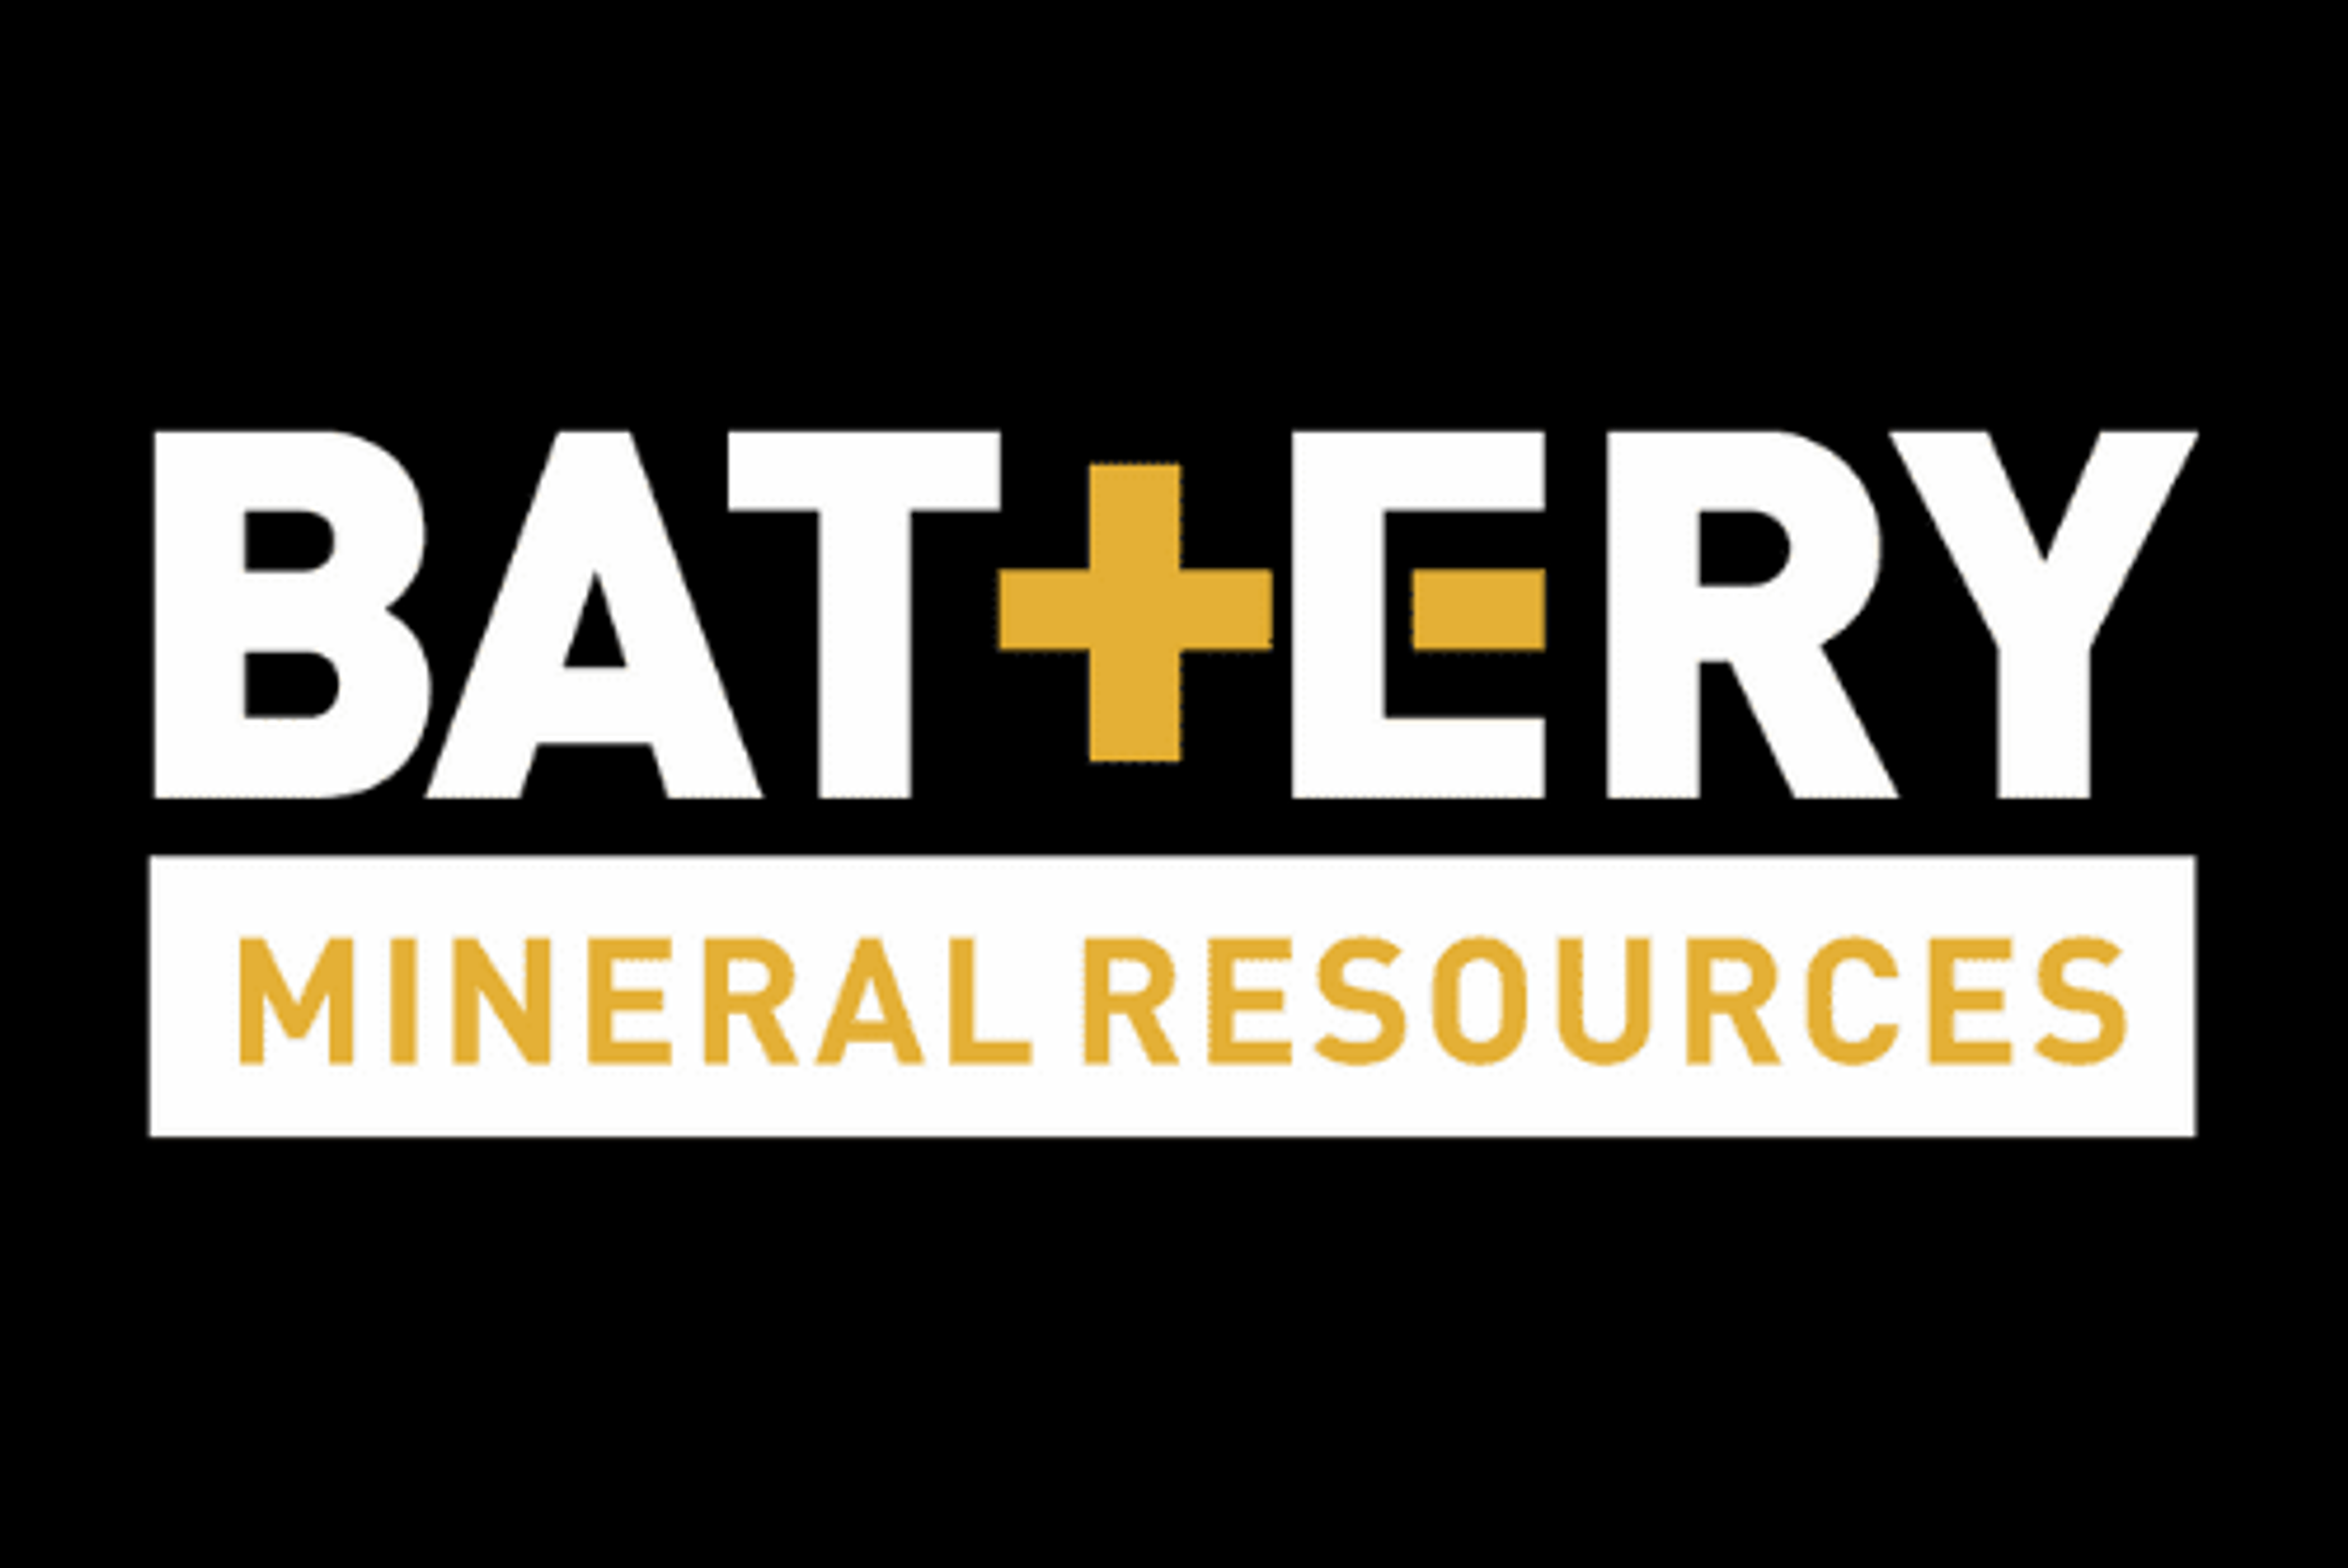 Battery Mineral Resources Announces Intercept of 34 Meters of 1.35% Copper from the Cinabrio Norte Target at Its Punitaqui Copper Mine in Chile